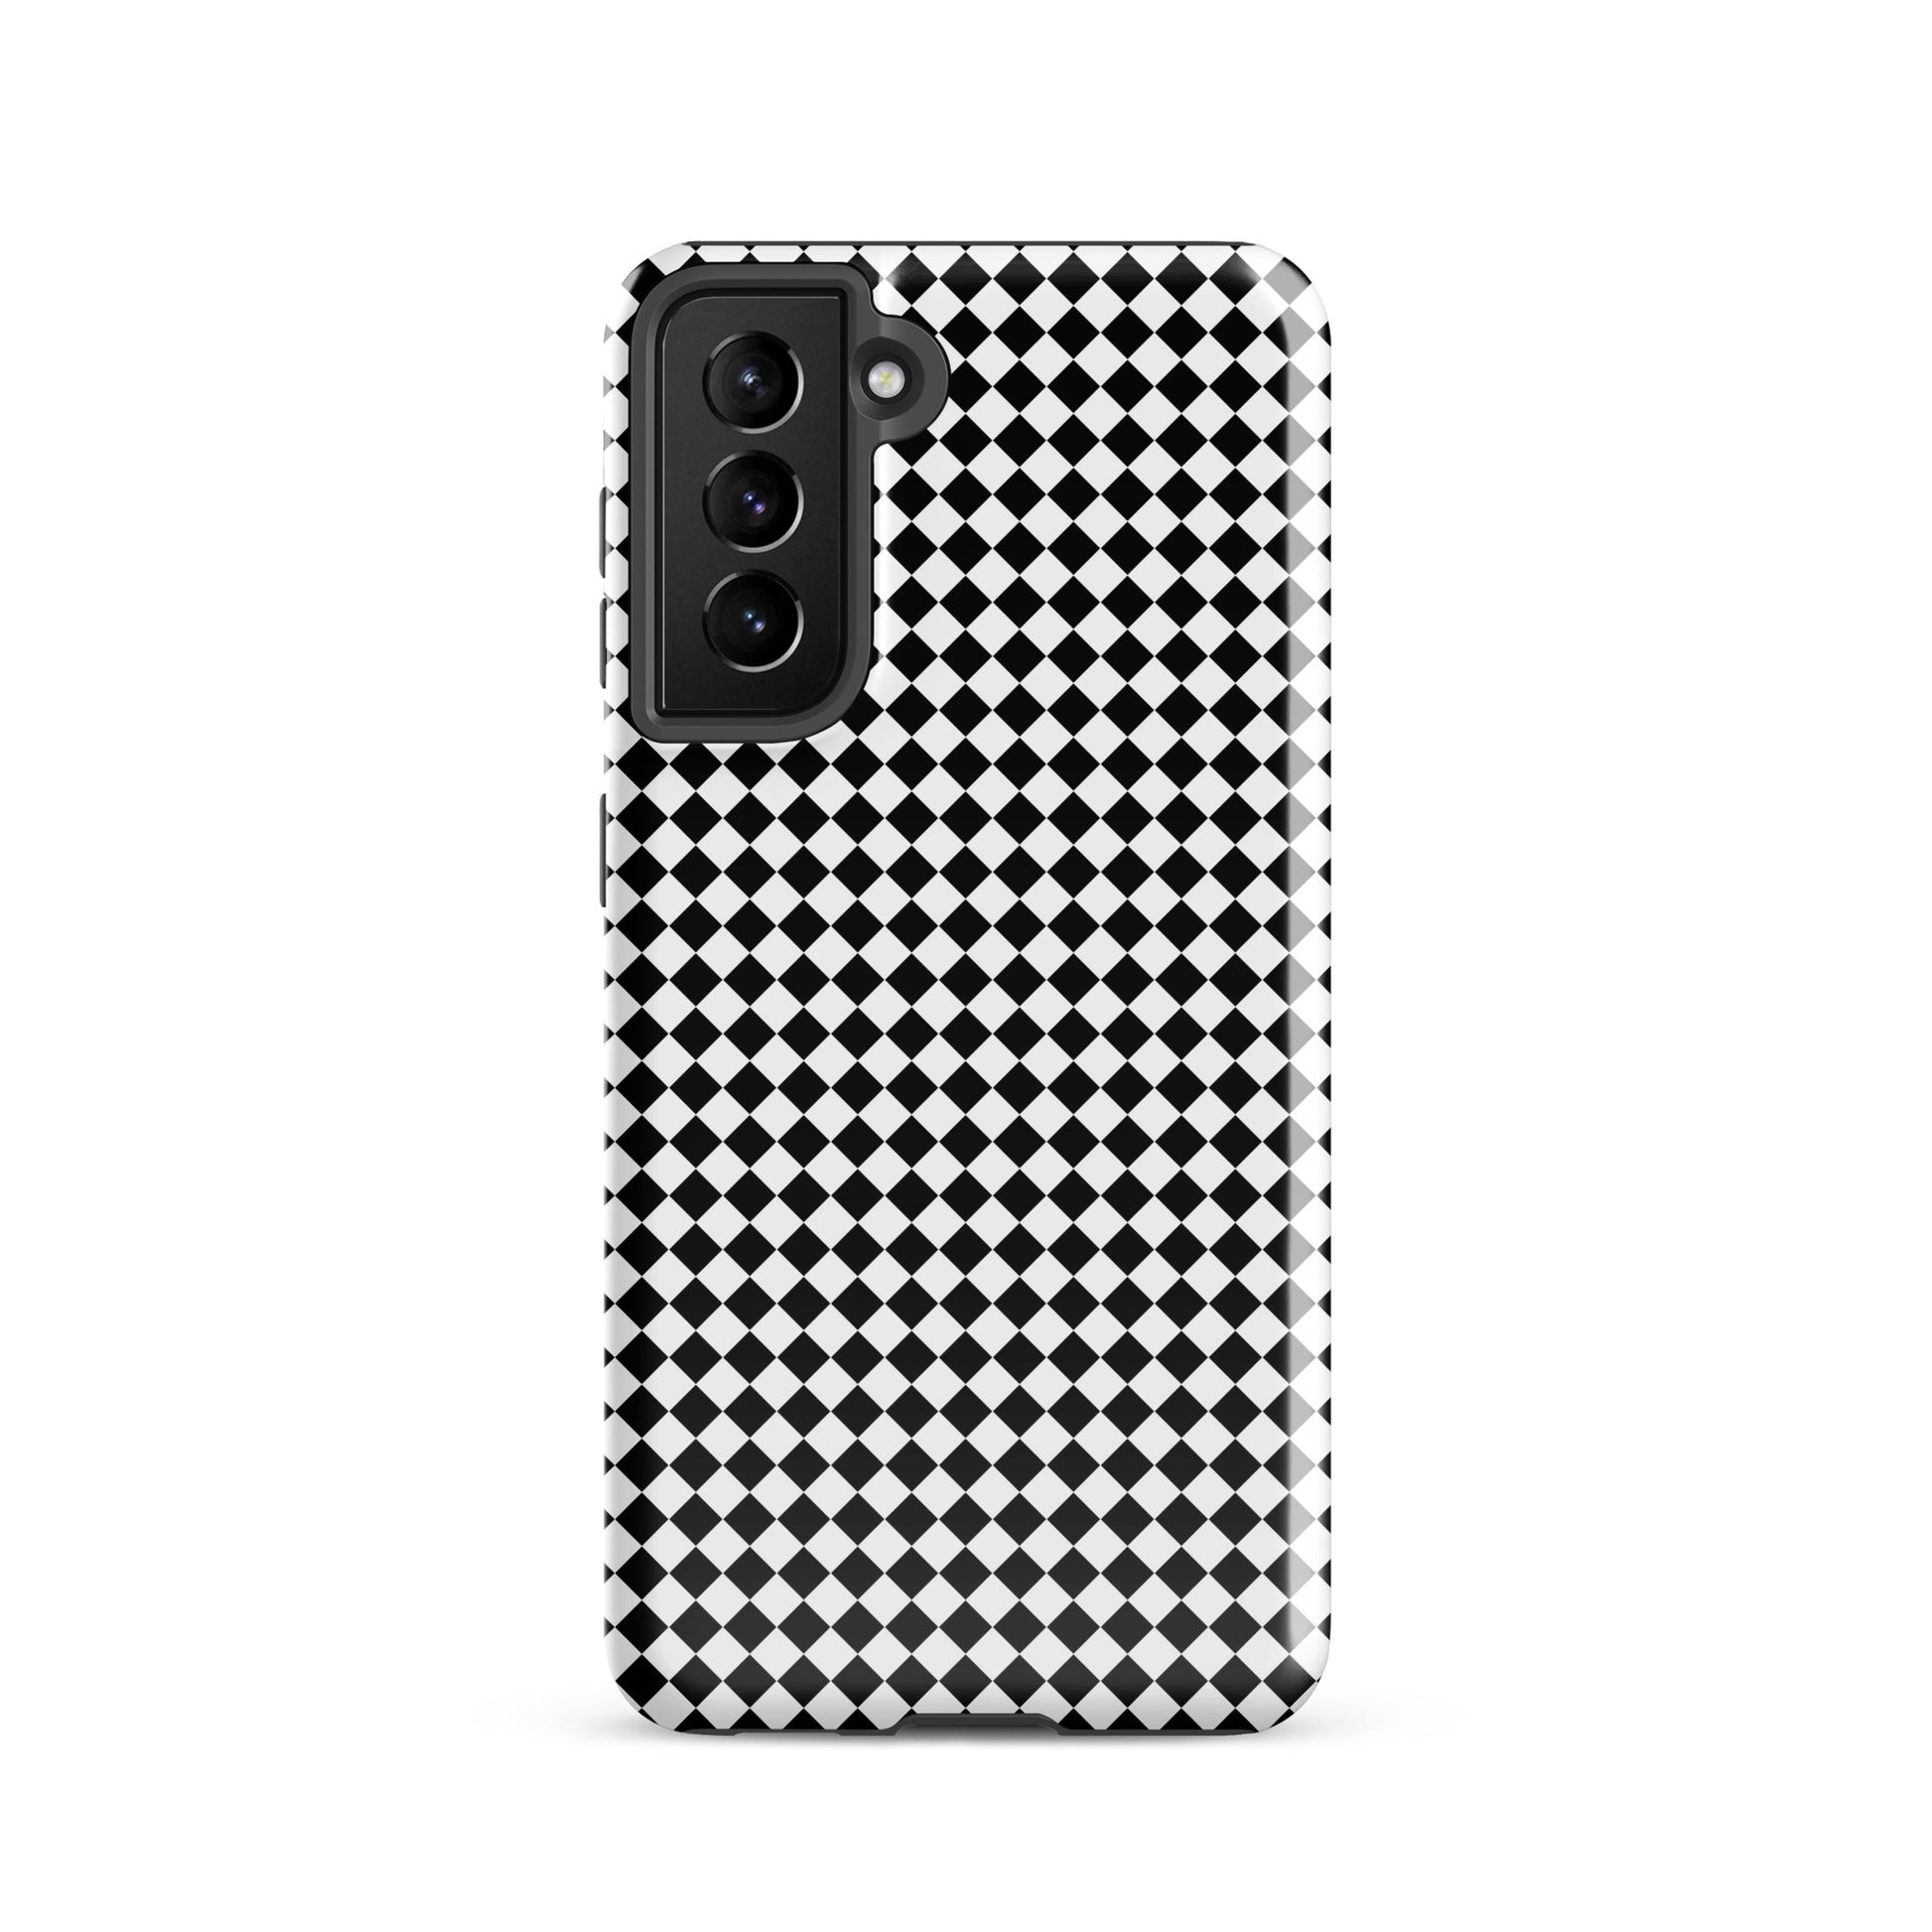 Tough case for Samsung with a print of a chessboard